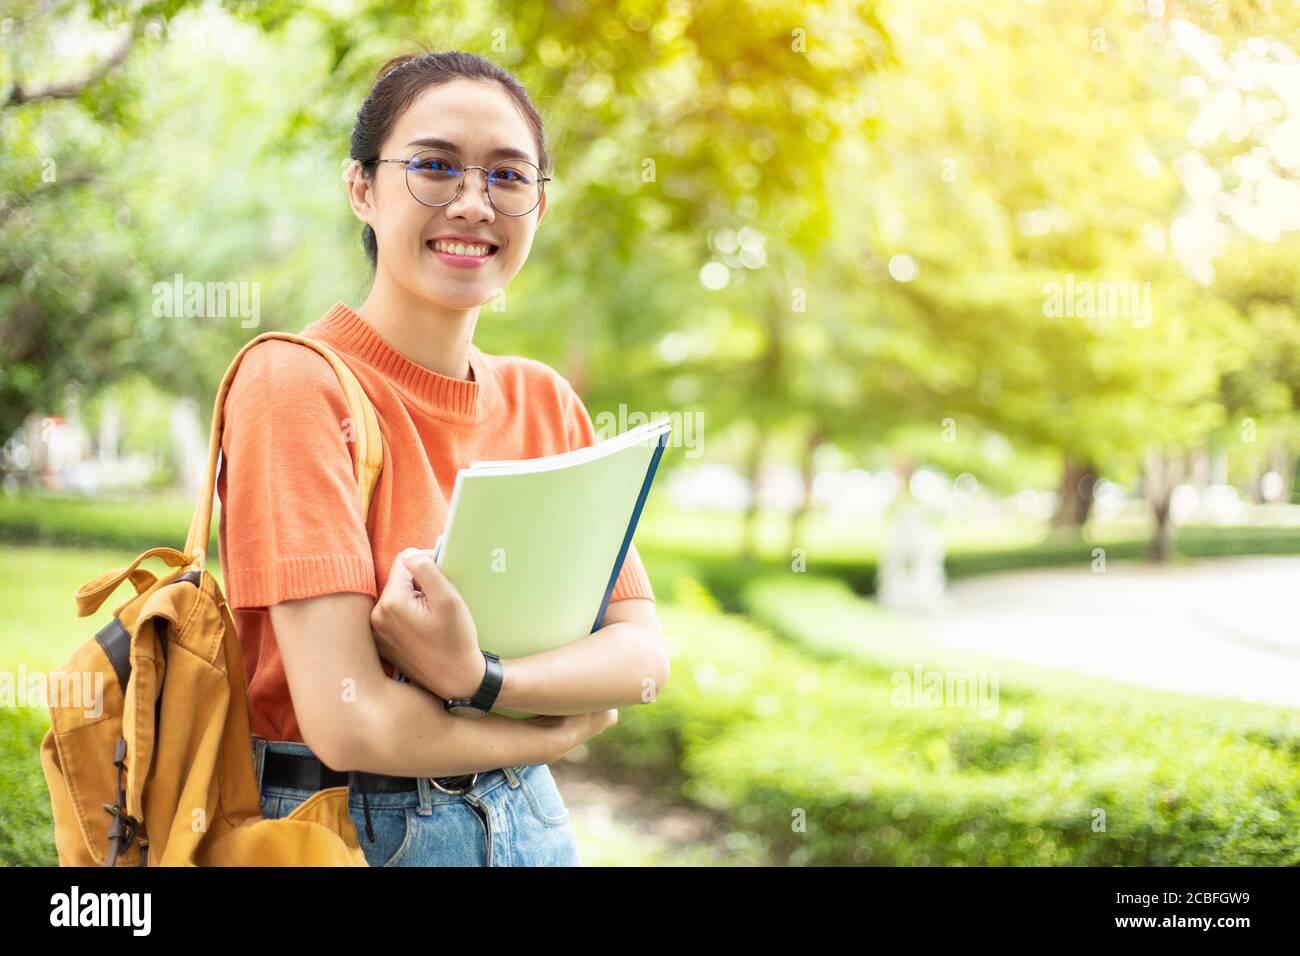 Portrait of nerd Asian woman girl smart teen happy smiling with glasses at green park outdoor in university campus with copyspace Stock Photo